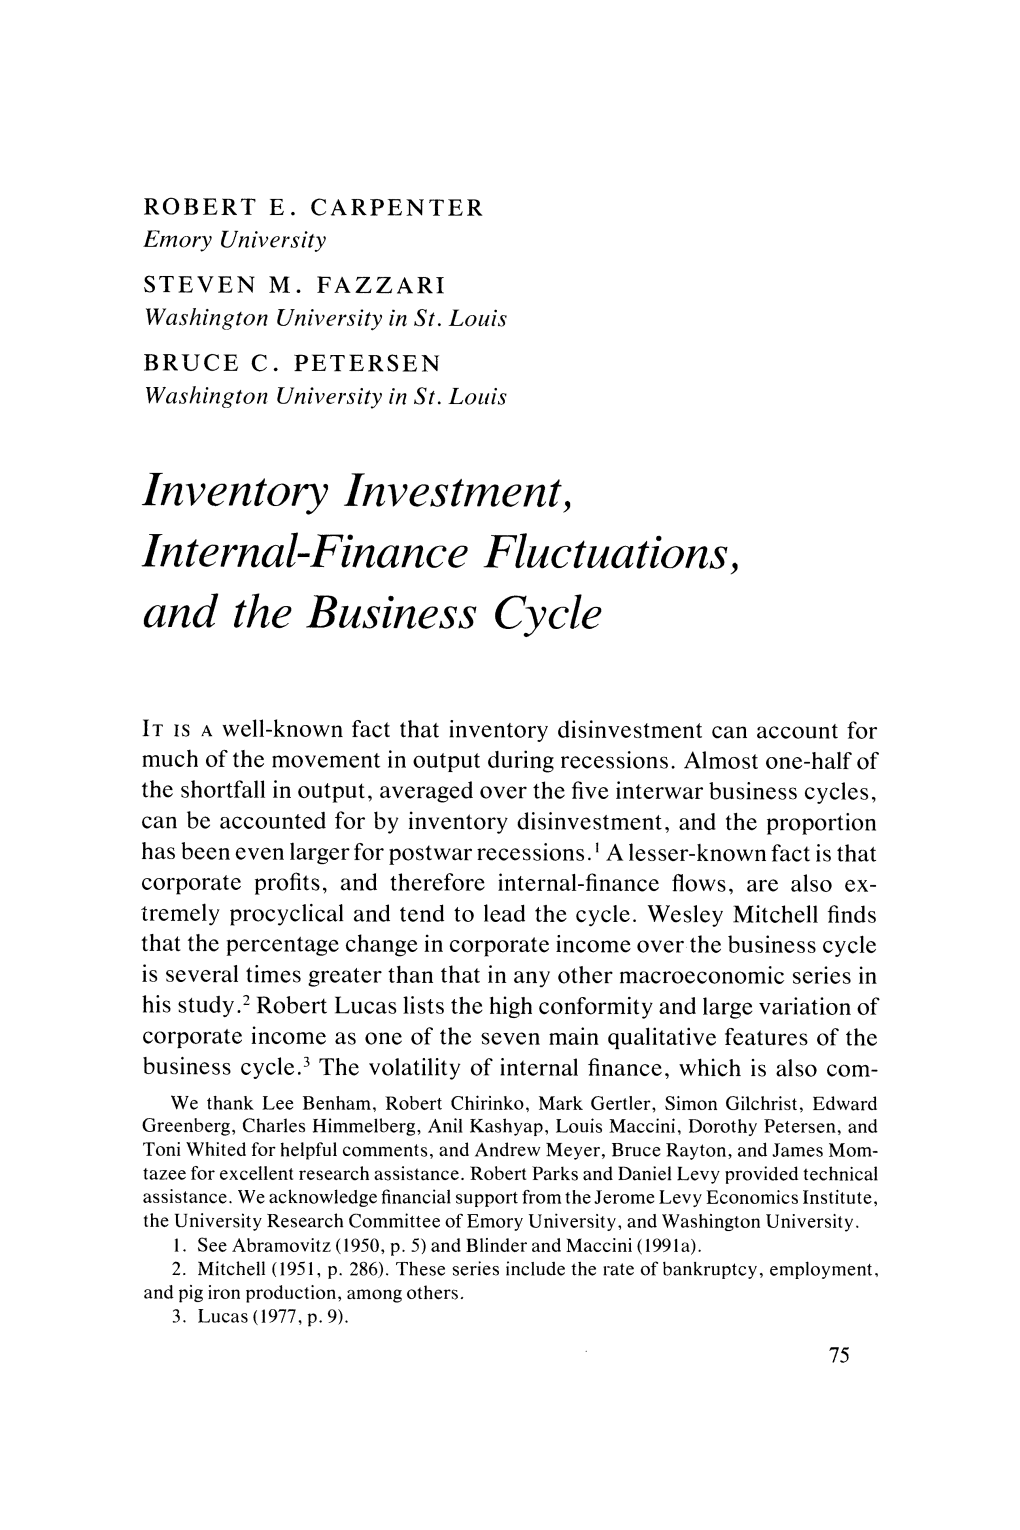 Inventory Investment, Internal-Finance Fluctuations, and the Business Cycle